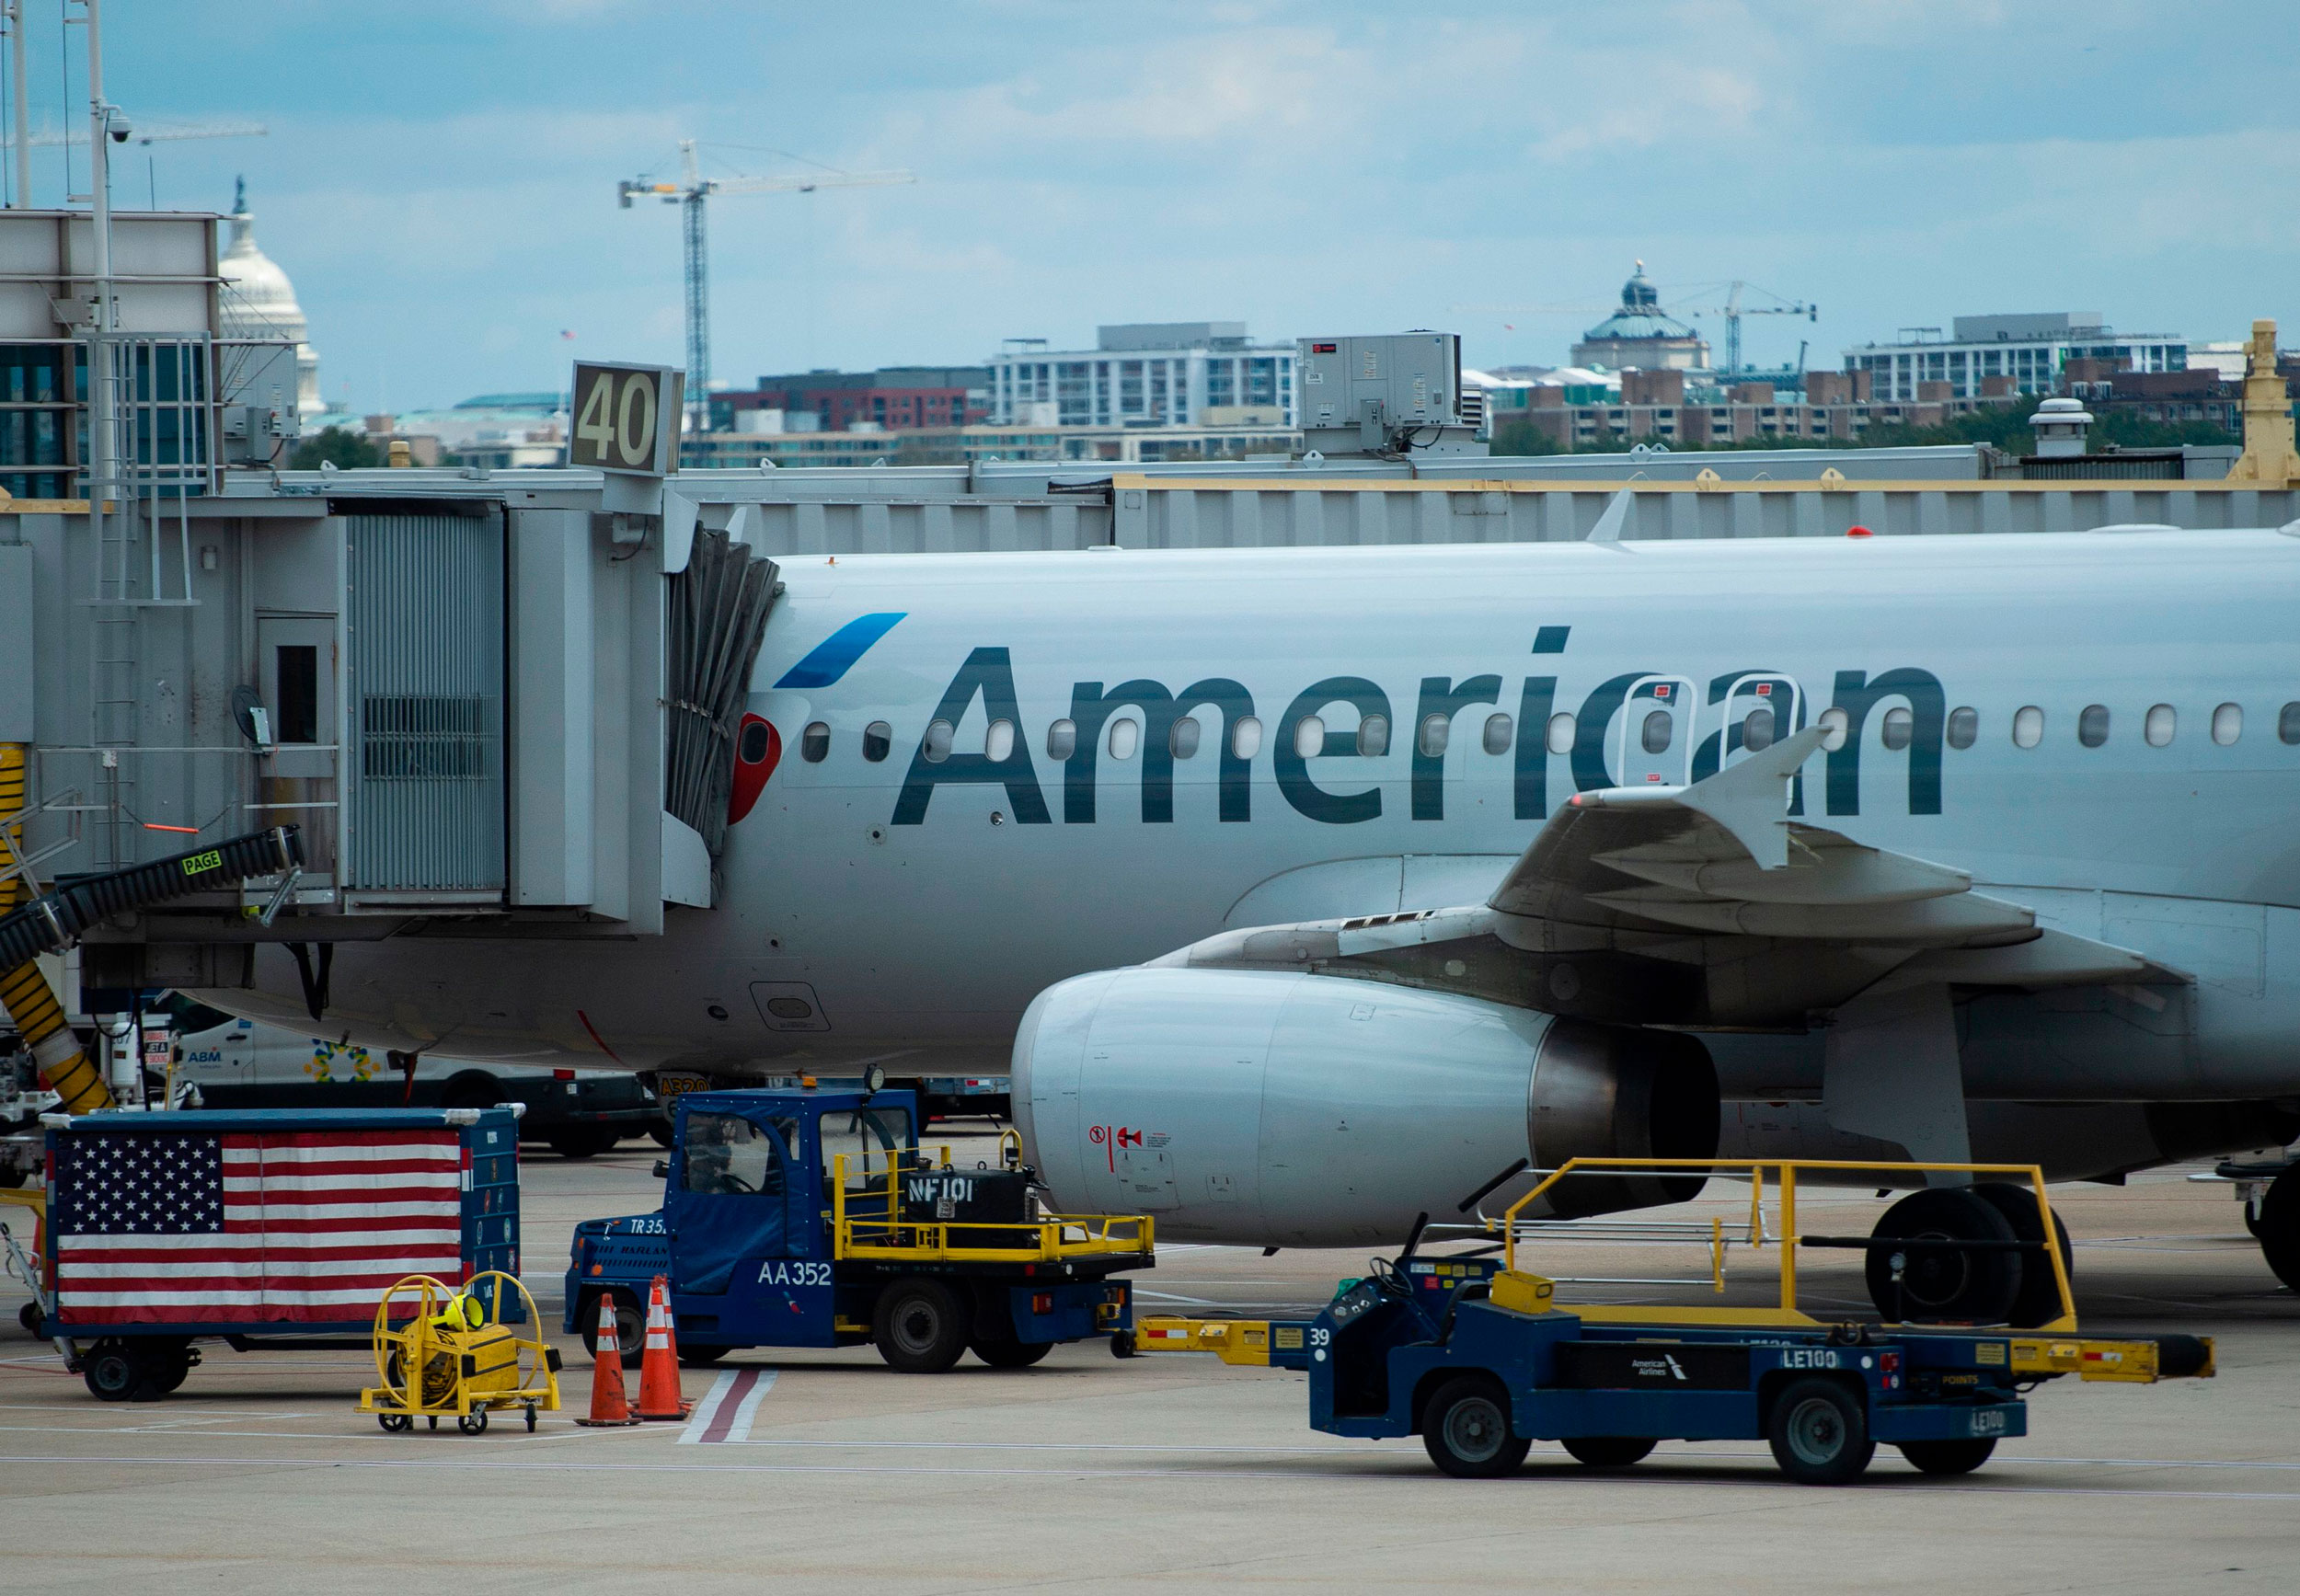 An American Airlines plane is parked at a gate at Ronald Reagan Washington National Airport in Arlington, Virginia, on May 12.